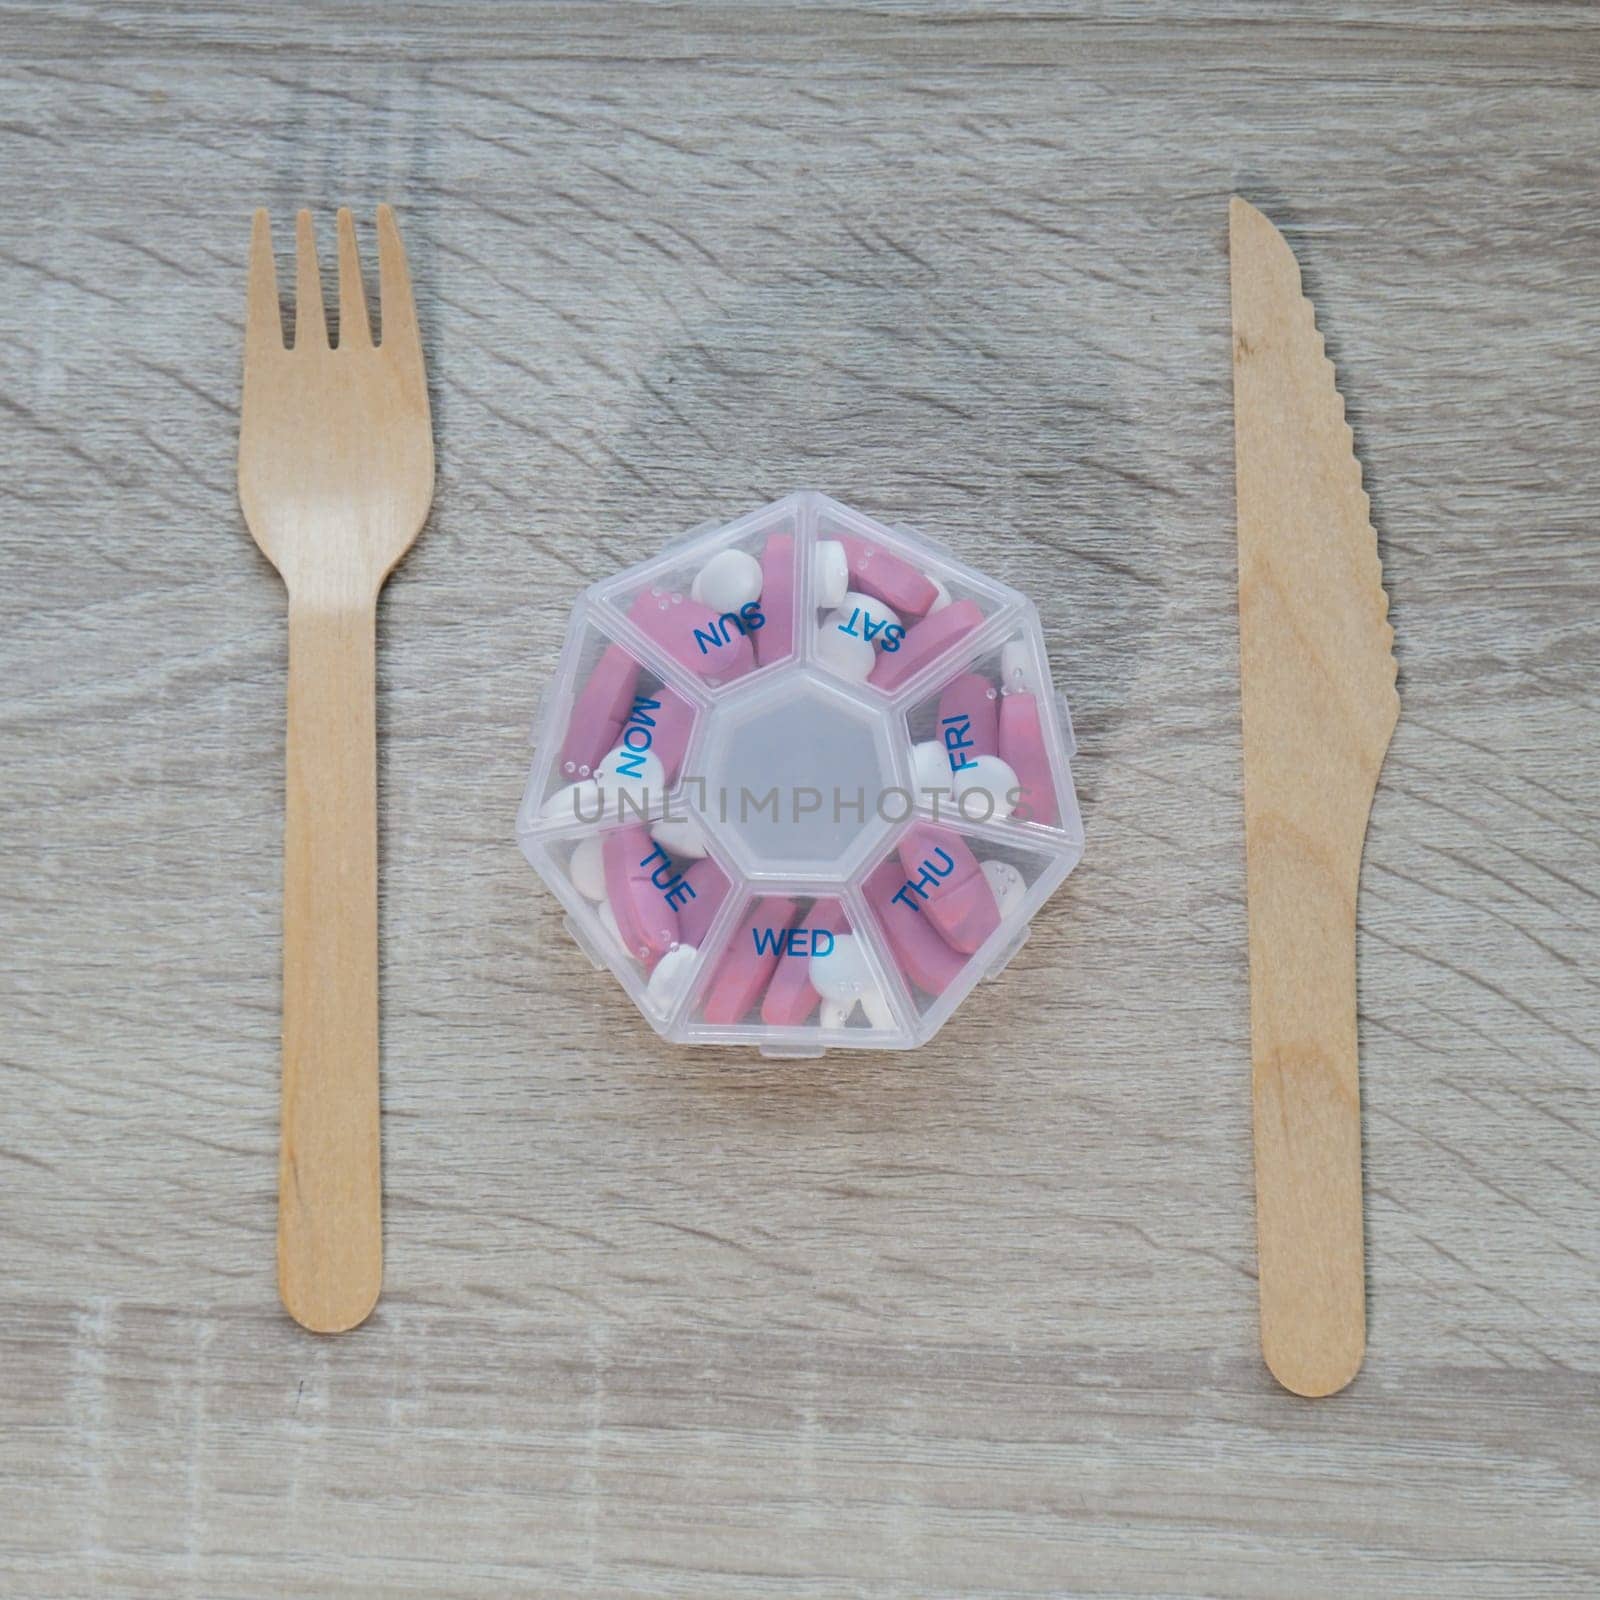 Organizer weekly shots with fork and knife medical pill box with doses of tablets for daily take medicine with white pink drugs and capsules. Daily vitamins at home. Health care and diseases cure by anna_stasiia